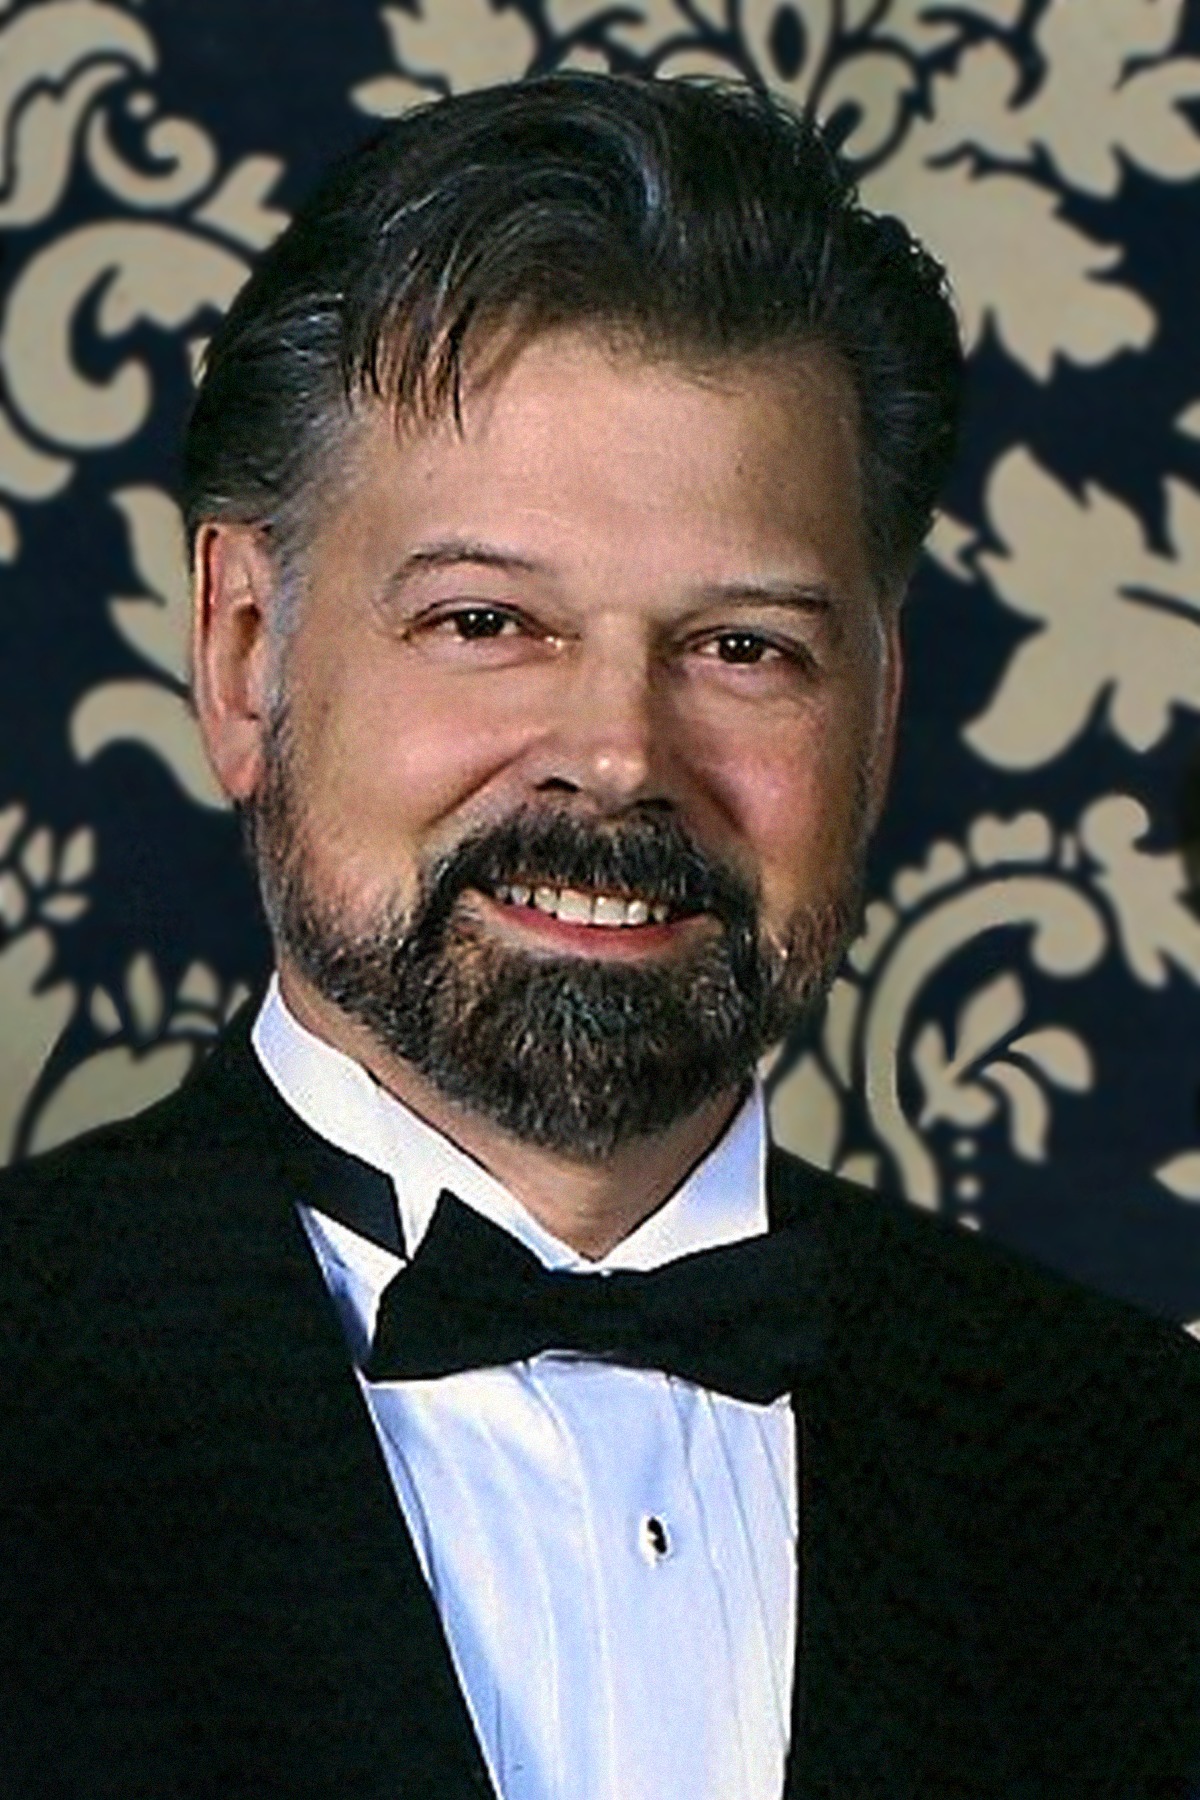 Stephen R. Campanella At an event for 